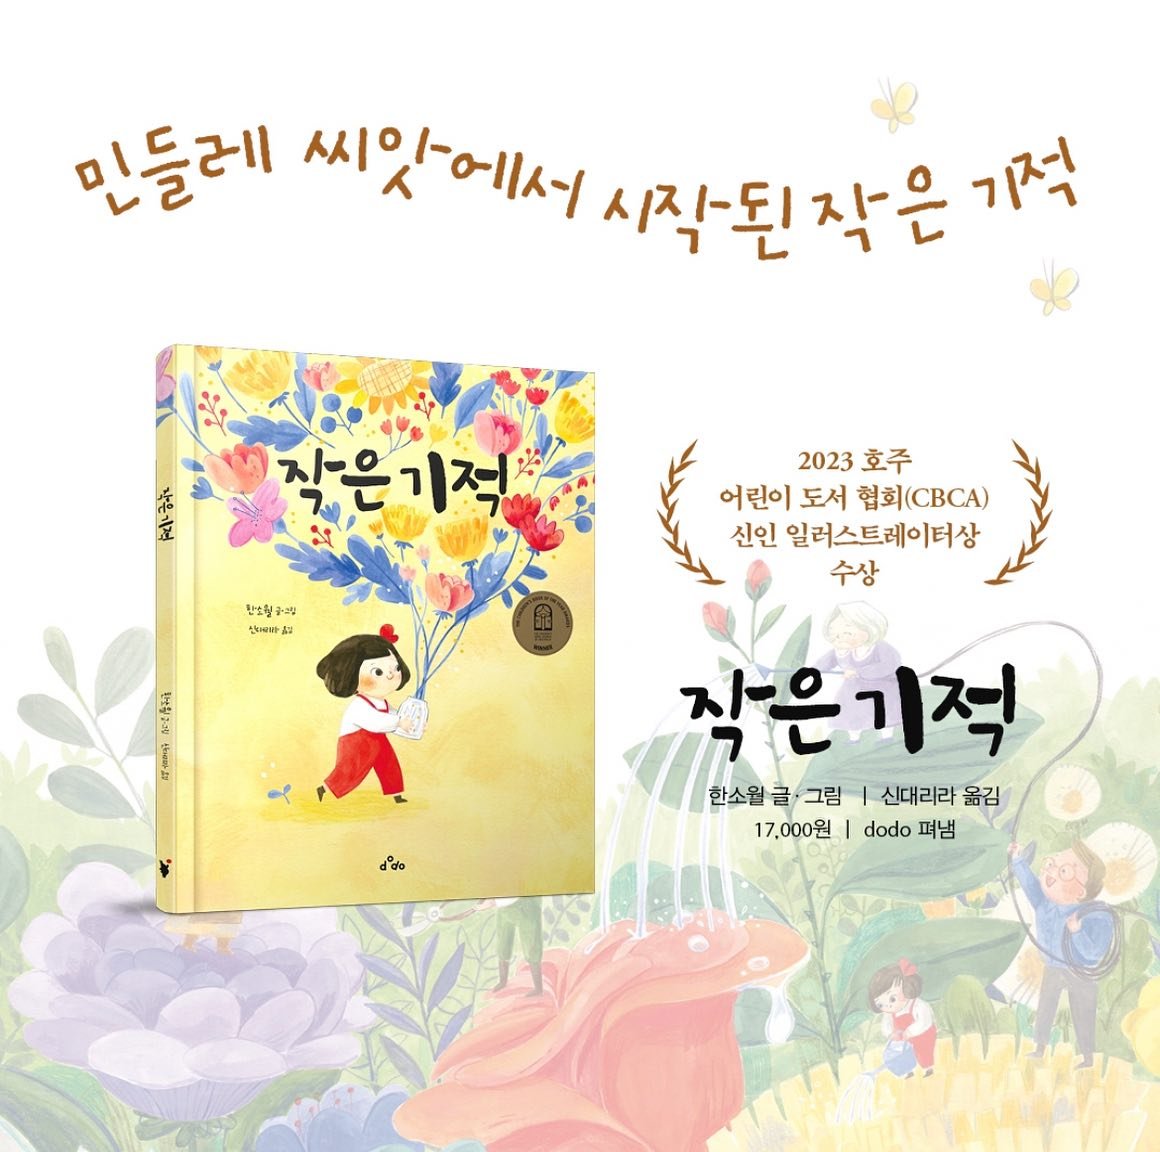 I hope it&rsquo;s not too late to share this beauty! When I returned home from Bologna, this beautiful Korean edition of Tiny Wonders greeted me💛

As someone with a Korean background, having my work published in Korean was something I had long wishe